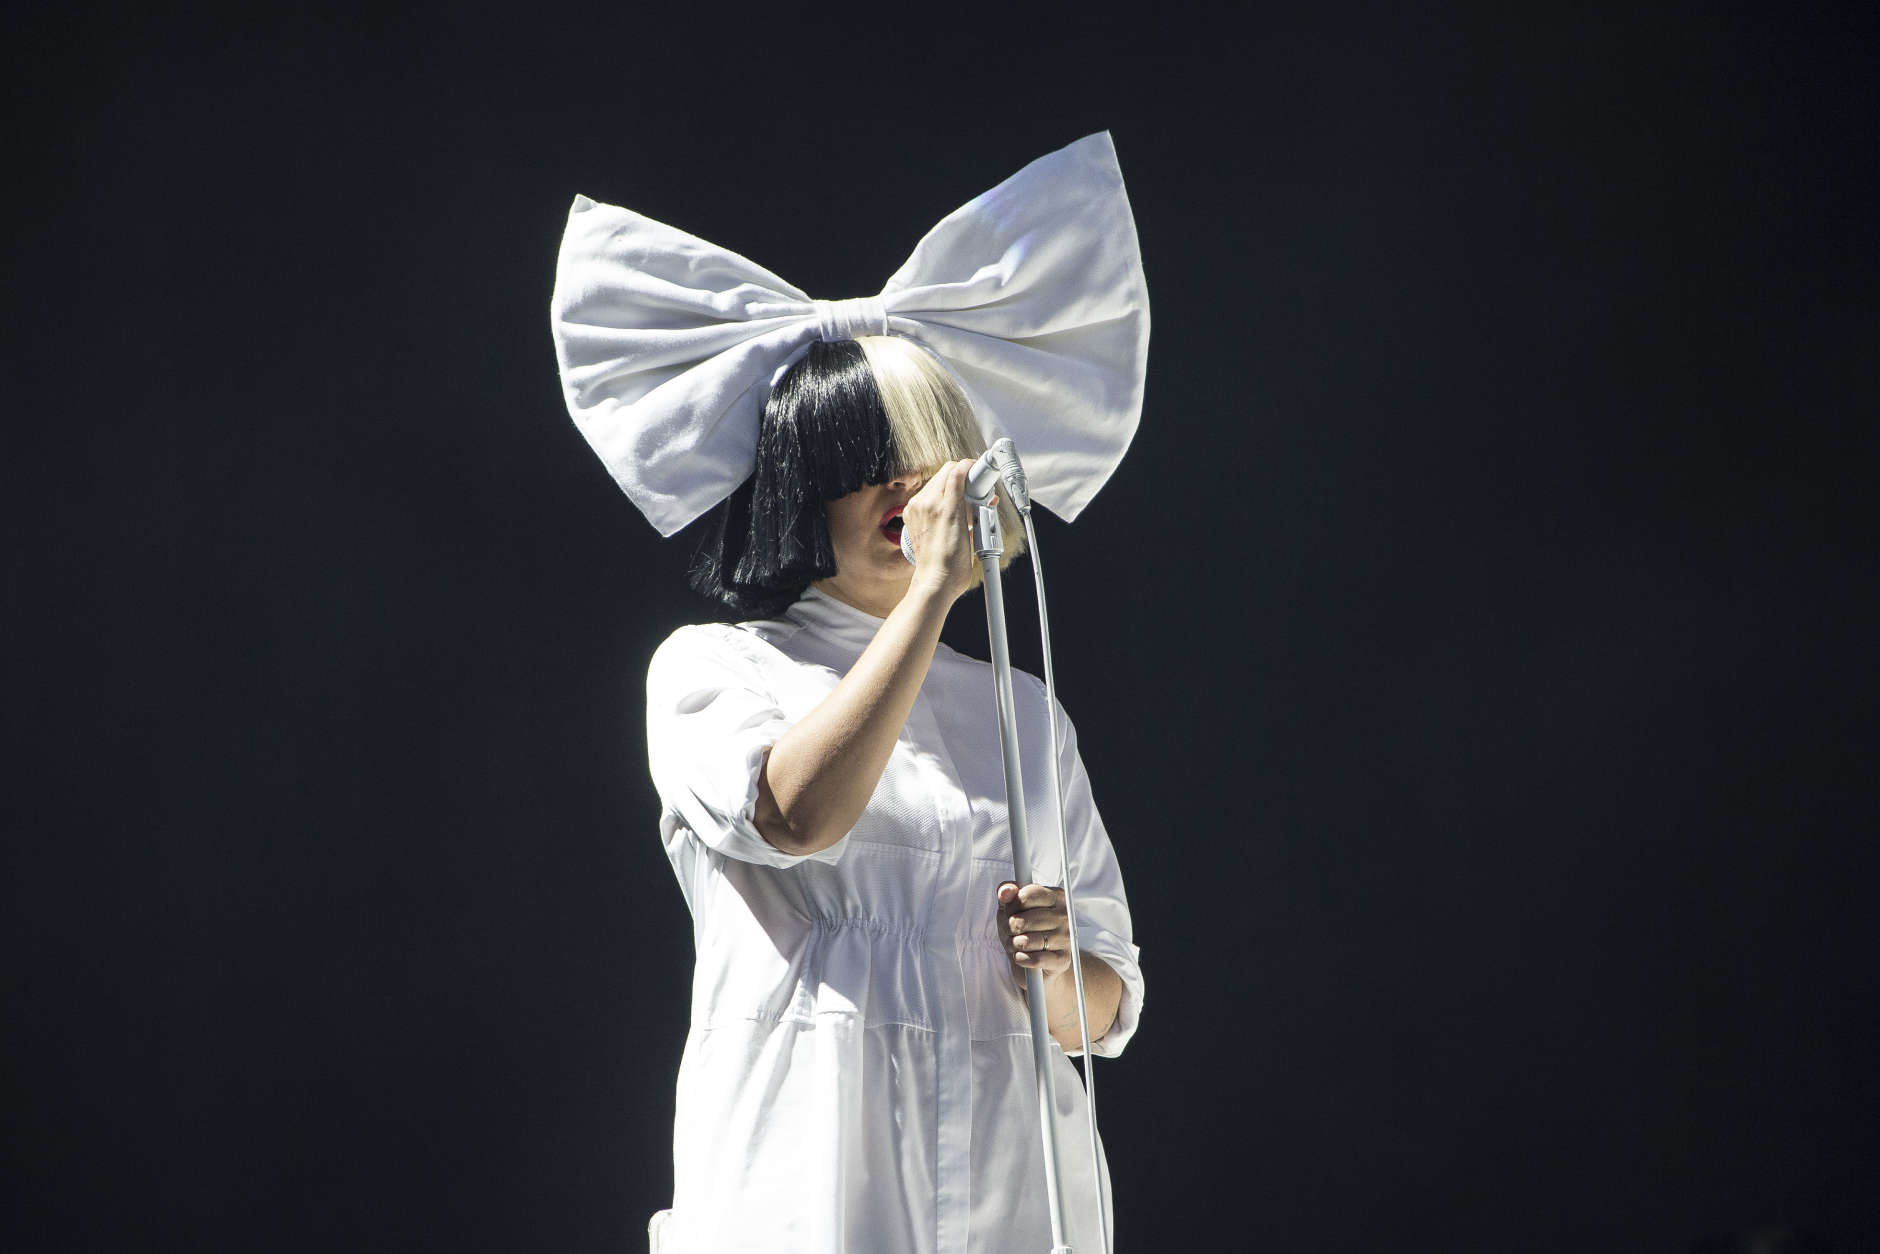 Singer Sia performs as part of the V Festival at Hylands Parks, Chelmsford, Saturday, Aug 20, 2016. (Joel Ryan/Invision/AP)